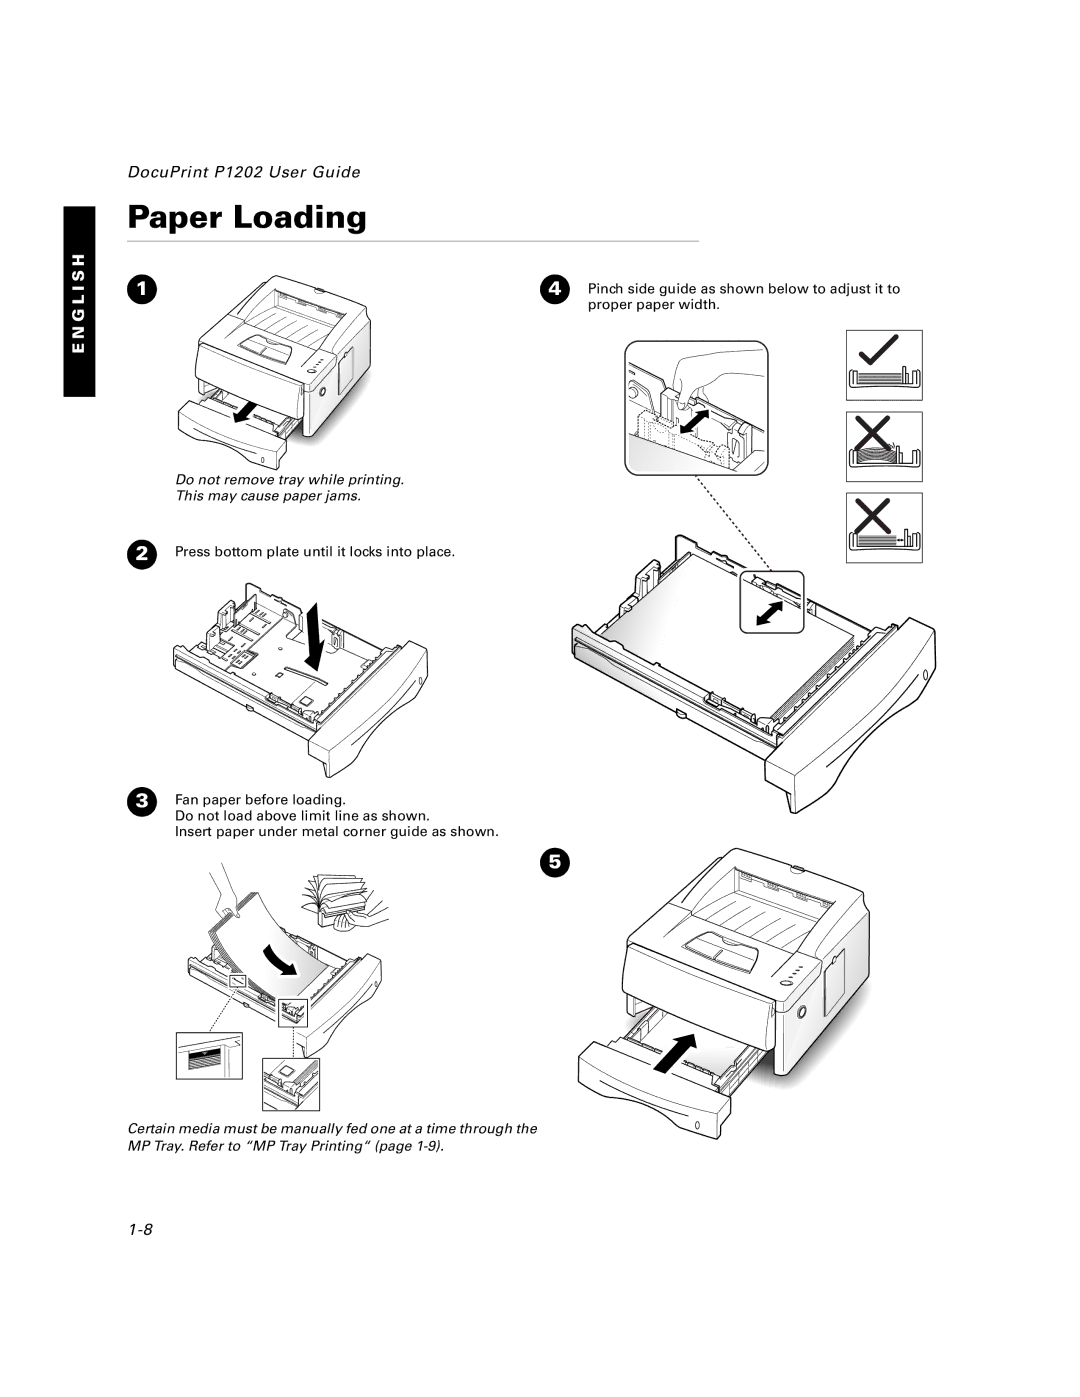 Xerox P1202 specifications Paper Loading, Do not remove tray while printing This may cause paper jams 